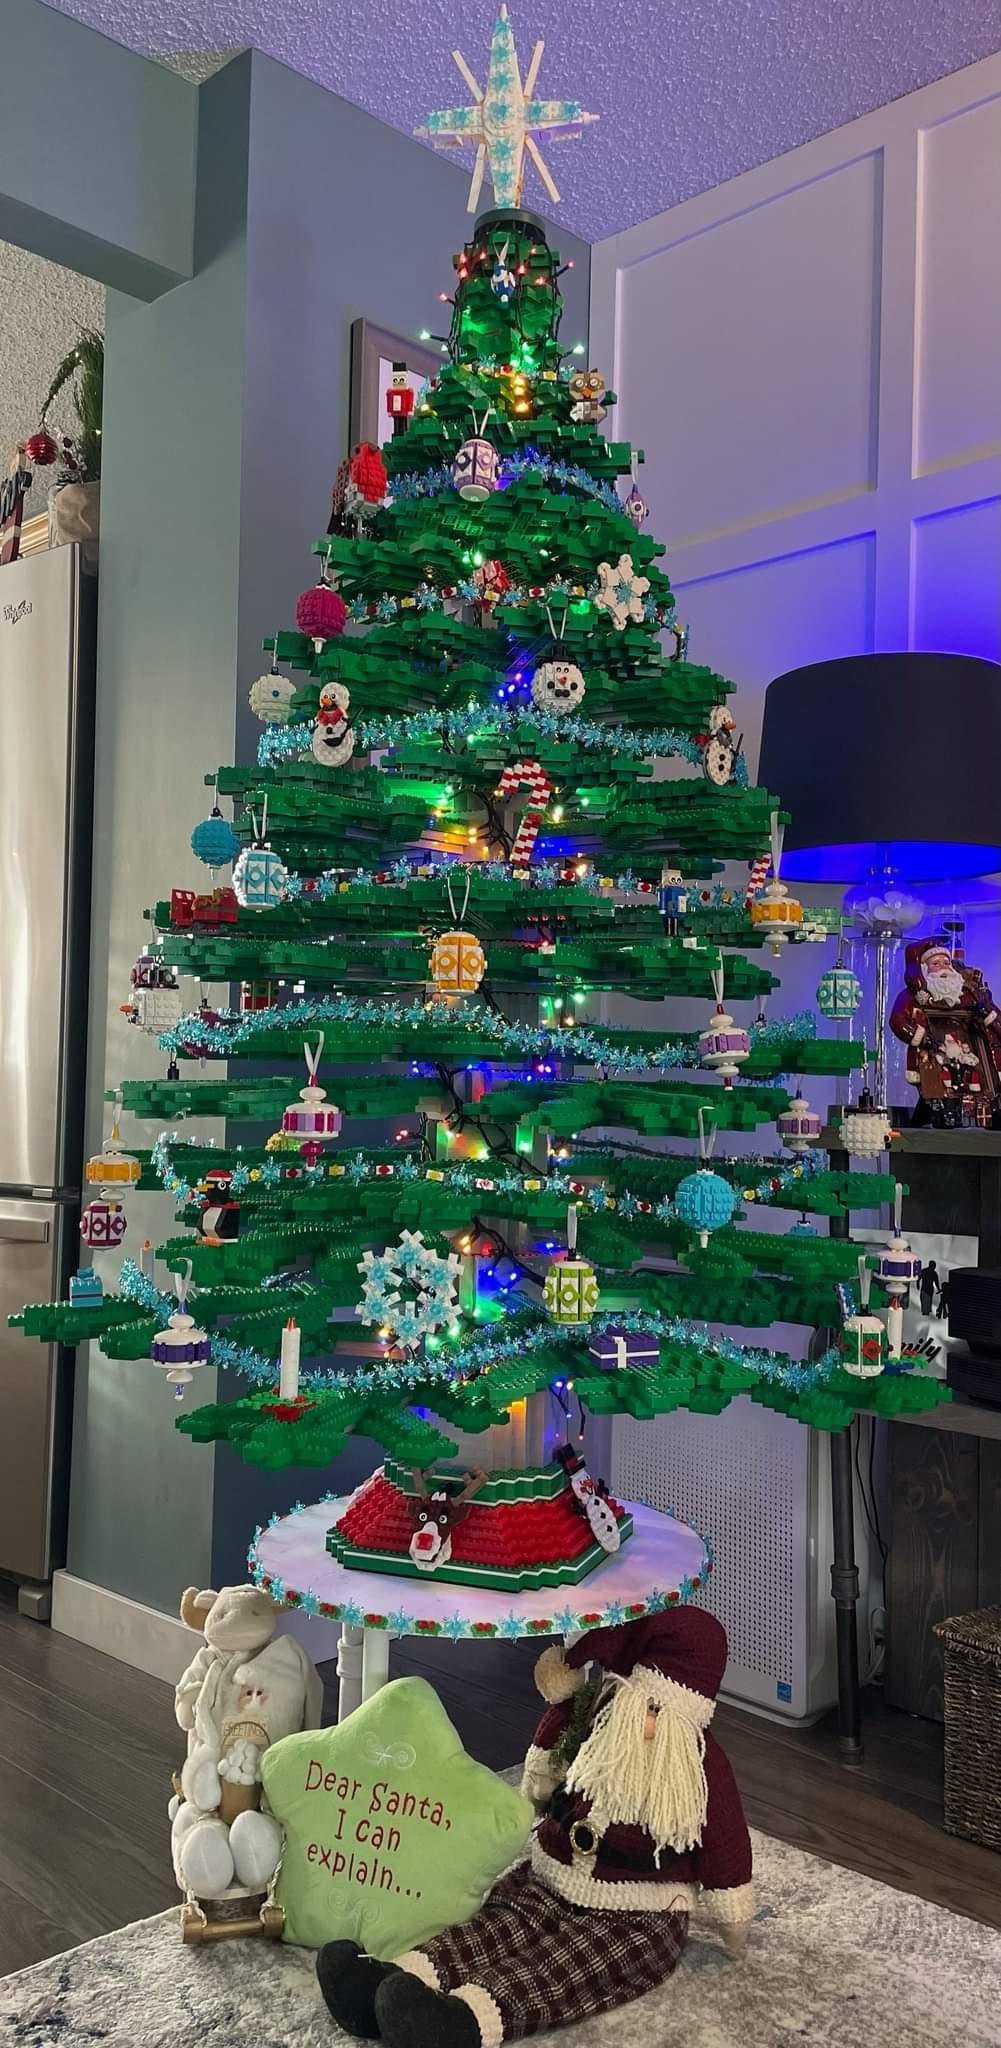 Christmas tree made entirely of Legos!